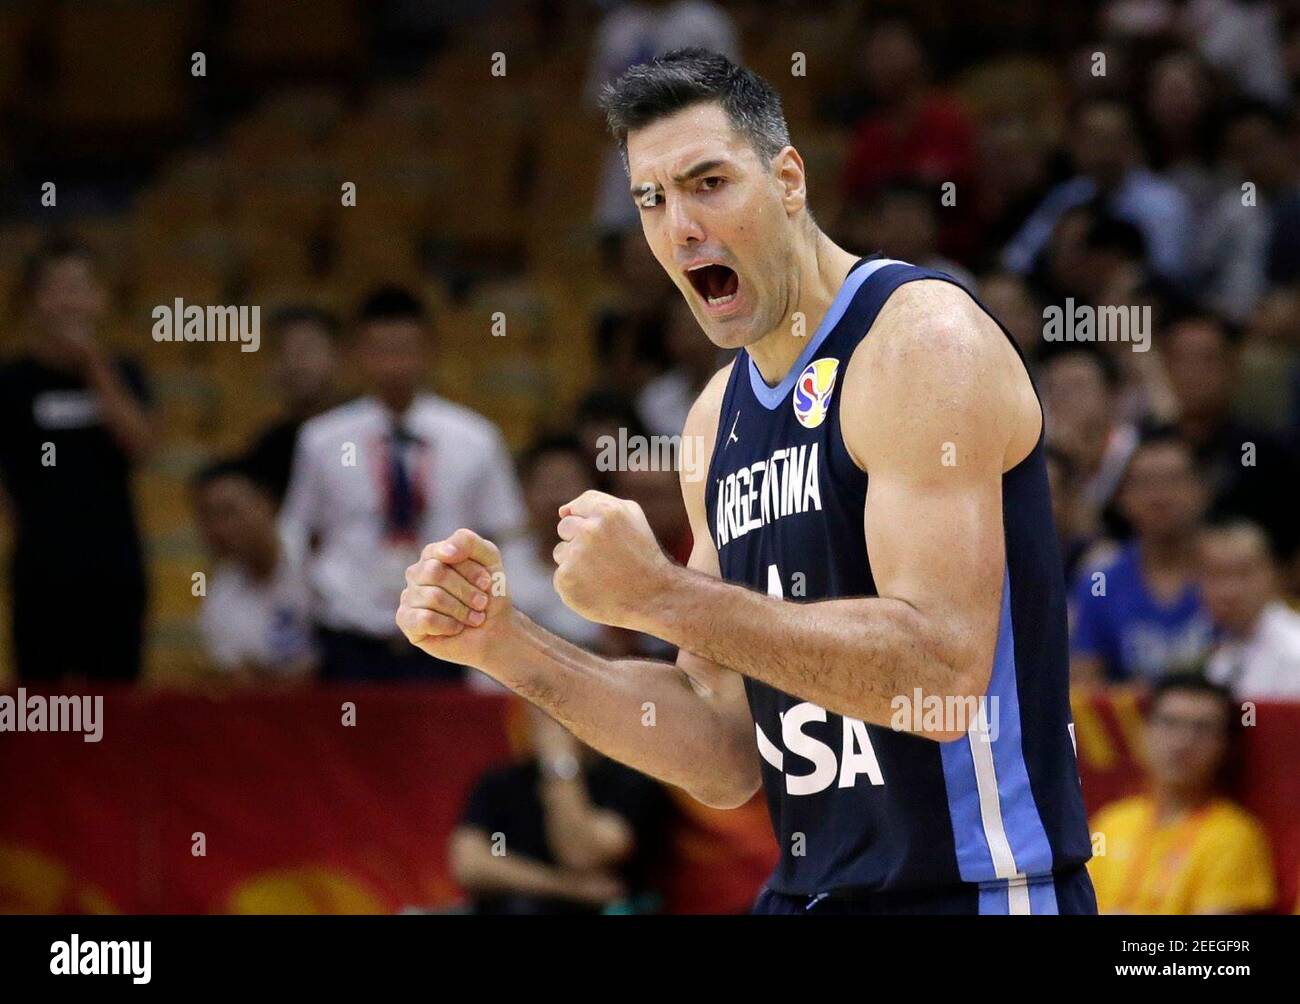 Basketball - FIBA World Cup - First Round - Group B - Russia v Argentina - Wuhan Sports Centre, Wuhan, China - September 4, 2019 Argentina's Luis Scola celebrates victory after the match REUTERS/Jason Lee Stock Photo